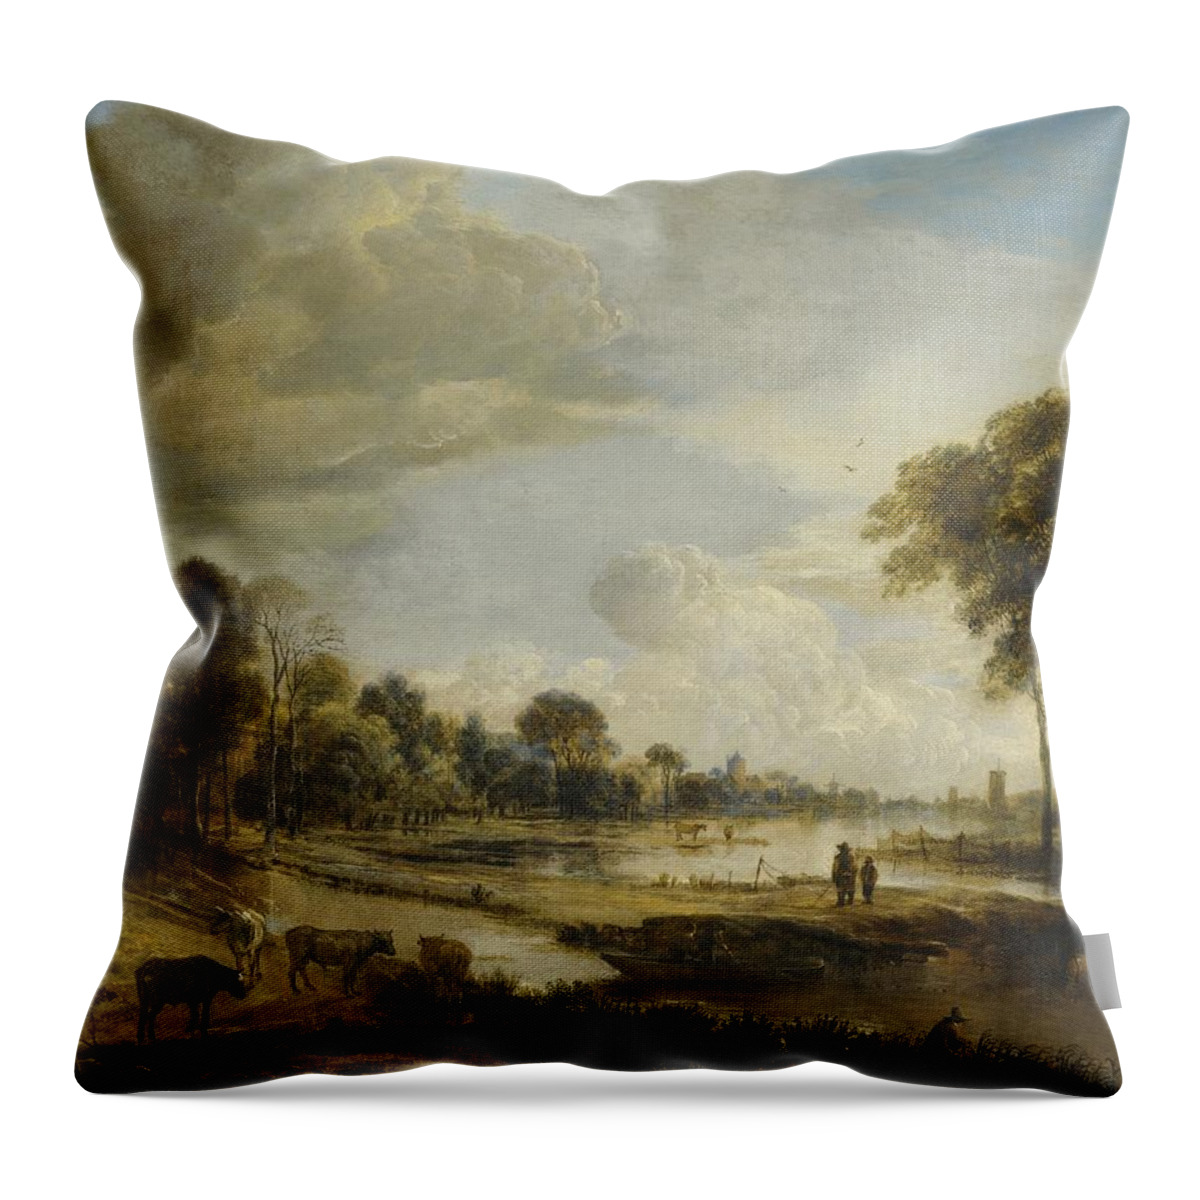 Landscape Throw Pillow featuring the painting A River Landscape with Figures and Cattle by Gianfranco Weiss